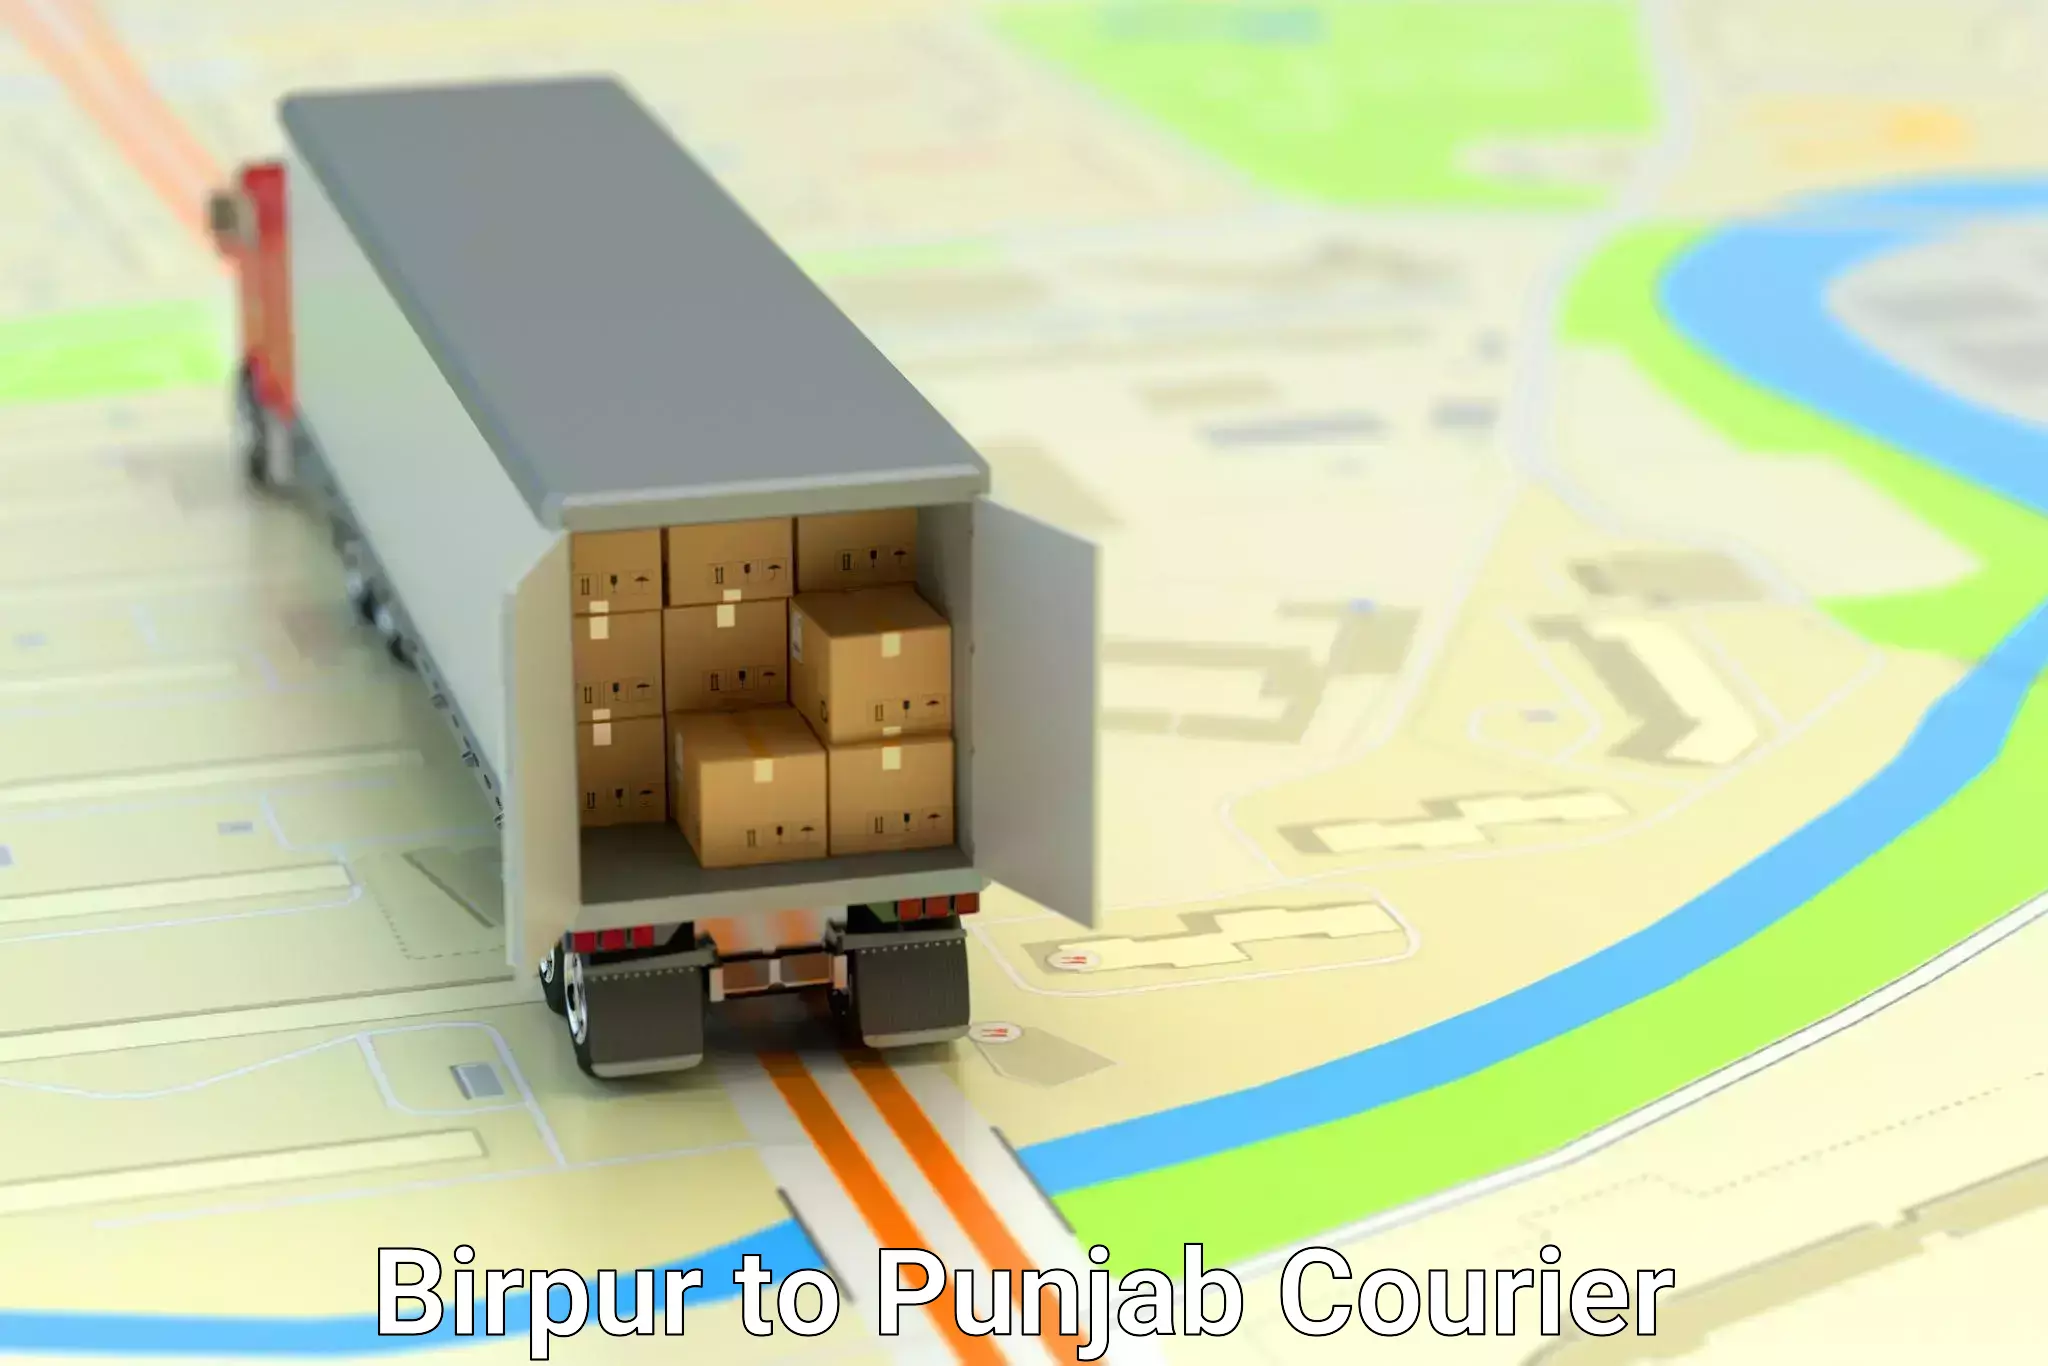 High-quality moving services Birpur to Zirakpur